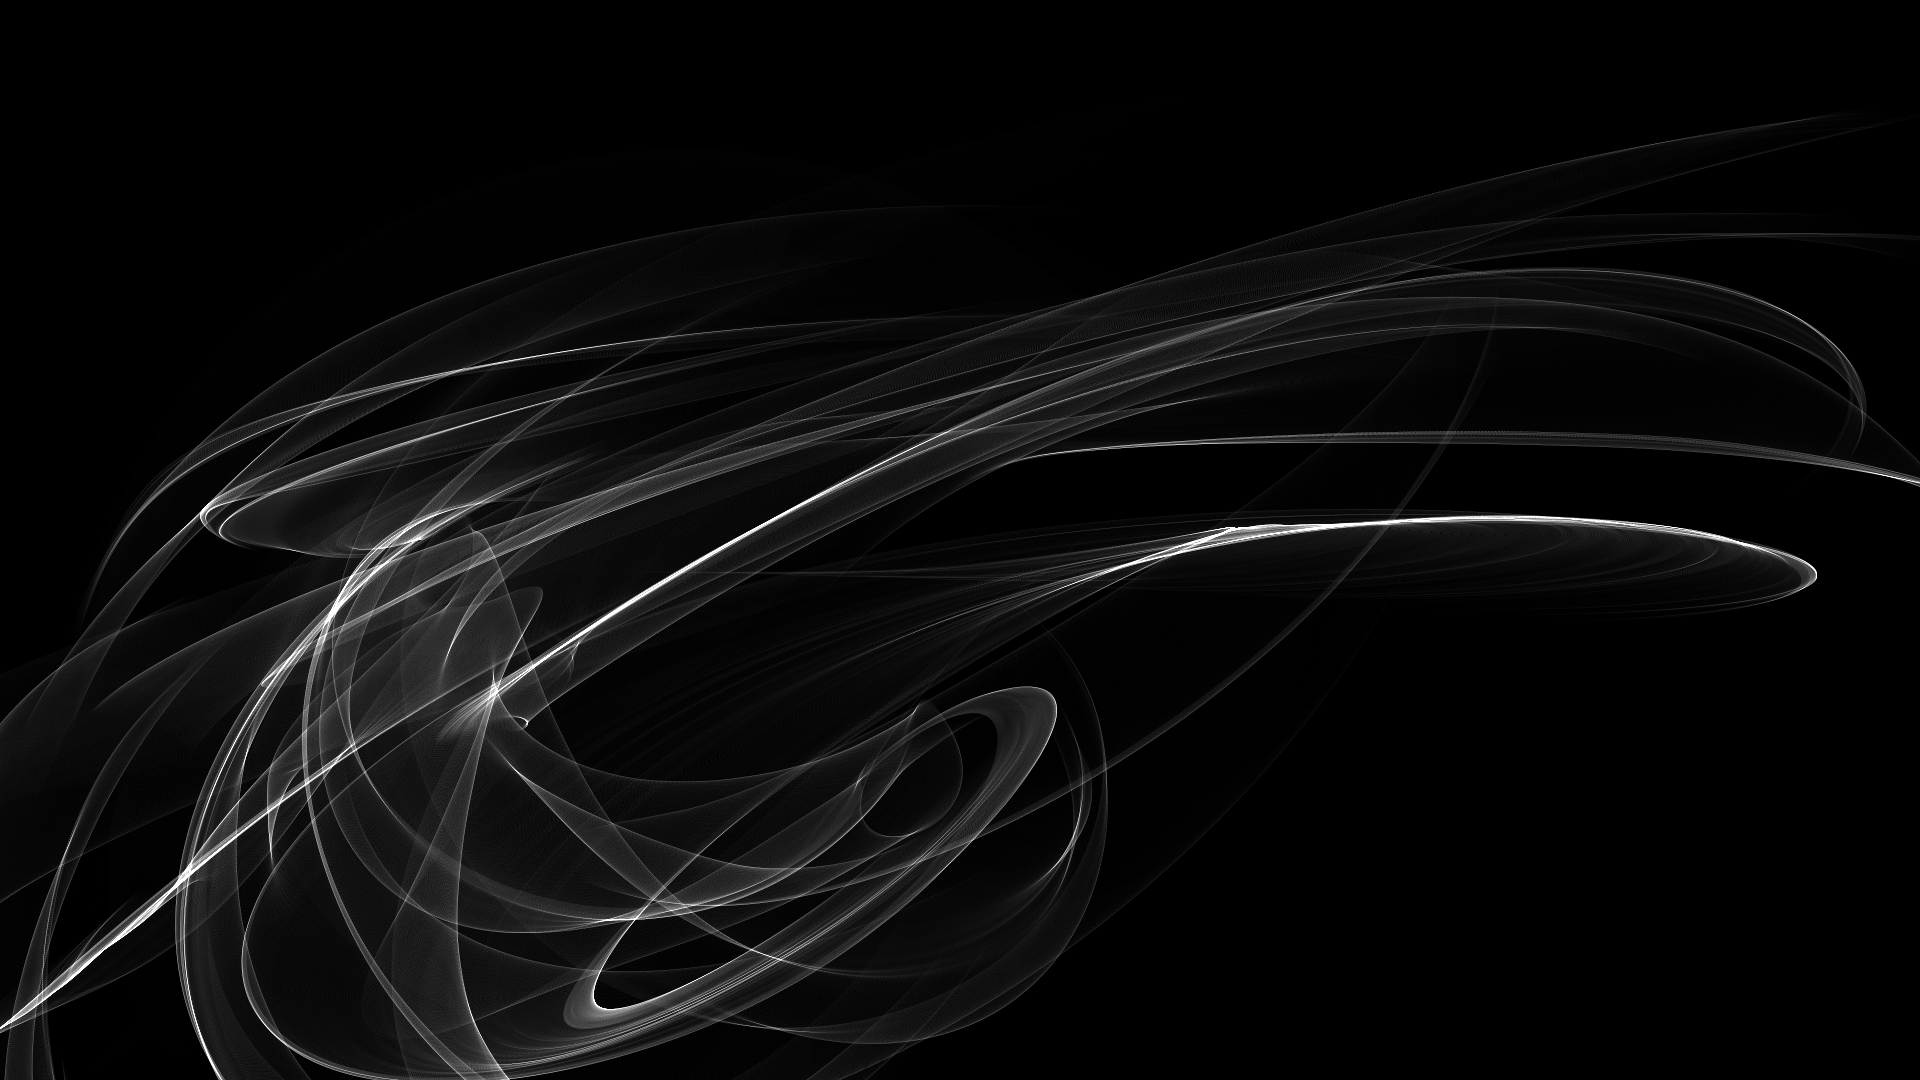 black wallpaper abstract images 1920x1080 1920x1080